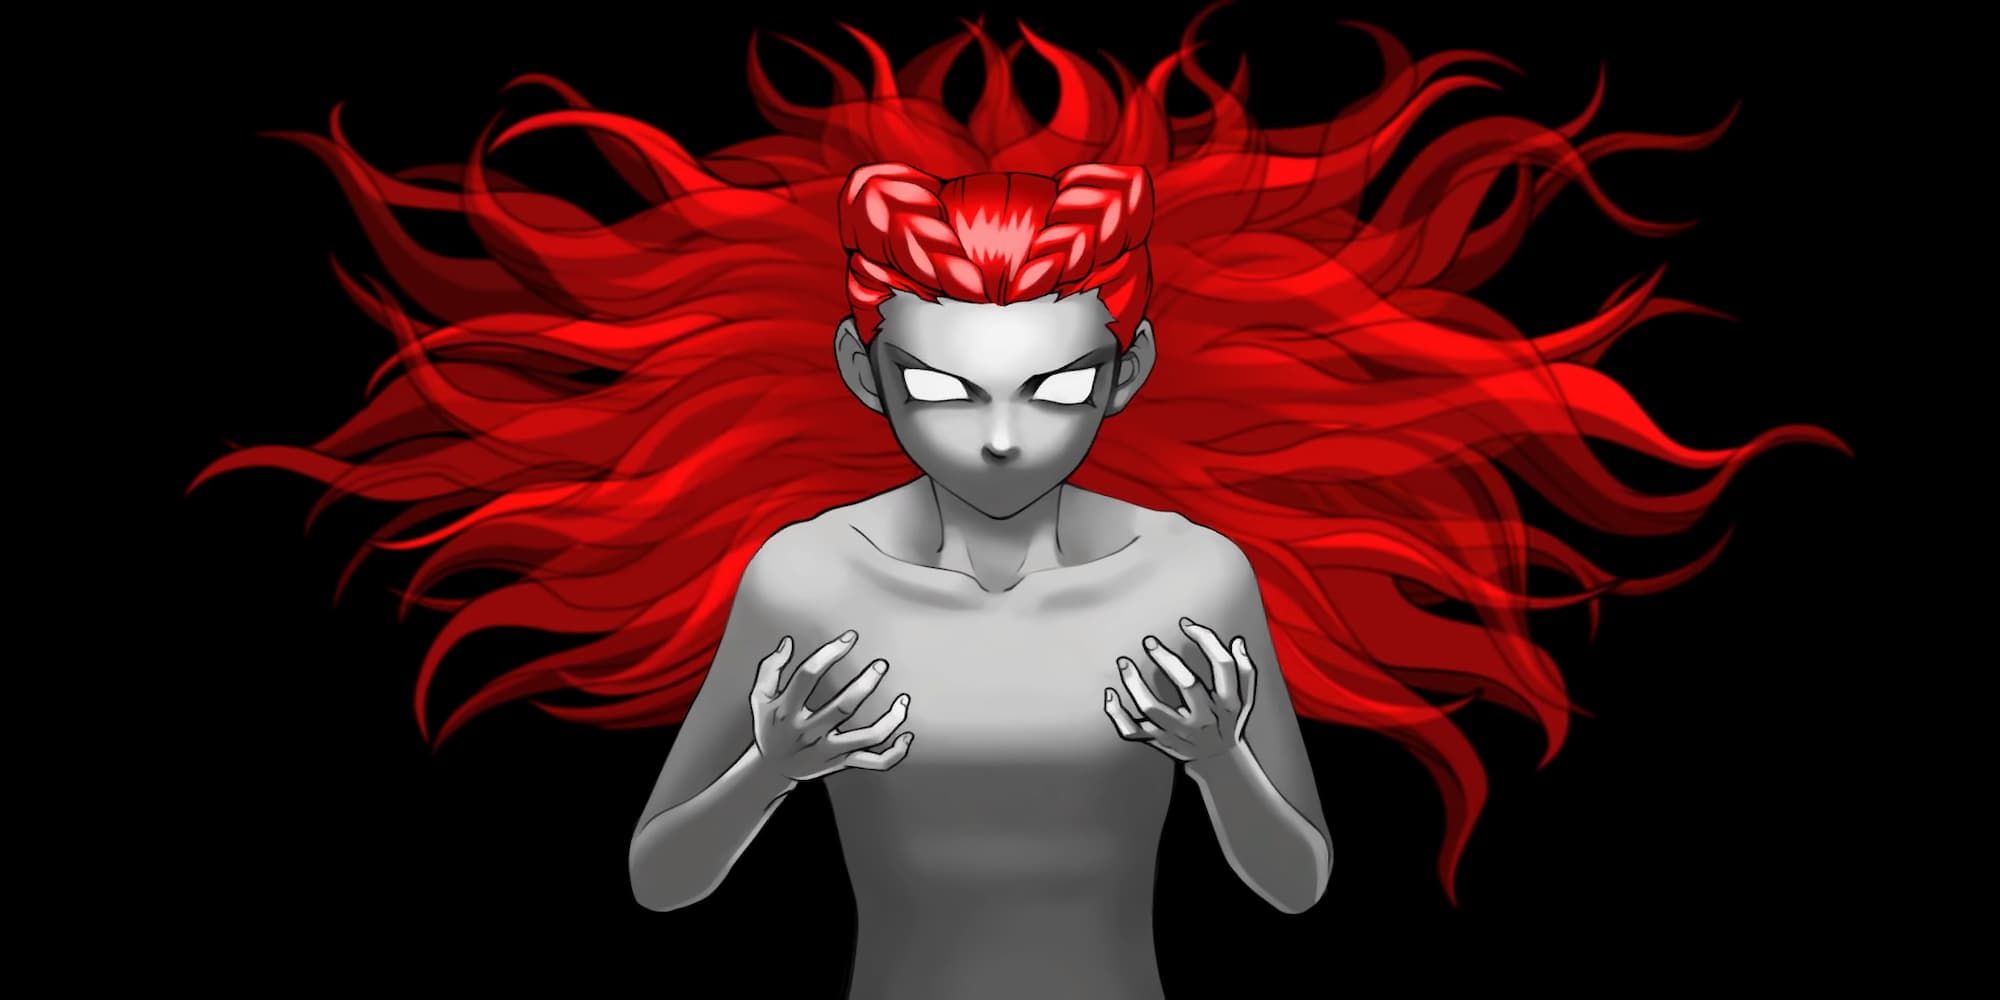 Ace Attorney Dahlia breakdown her spirit form all white with brilliant long red hair splayed out arms in front and flexed in anger